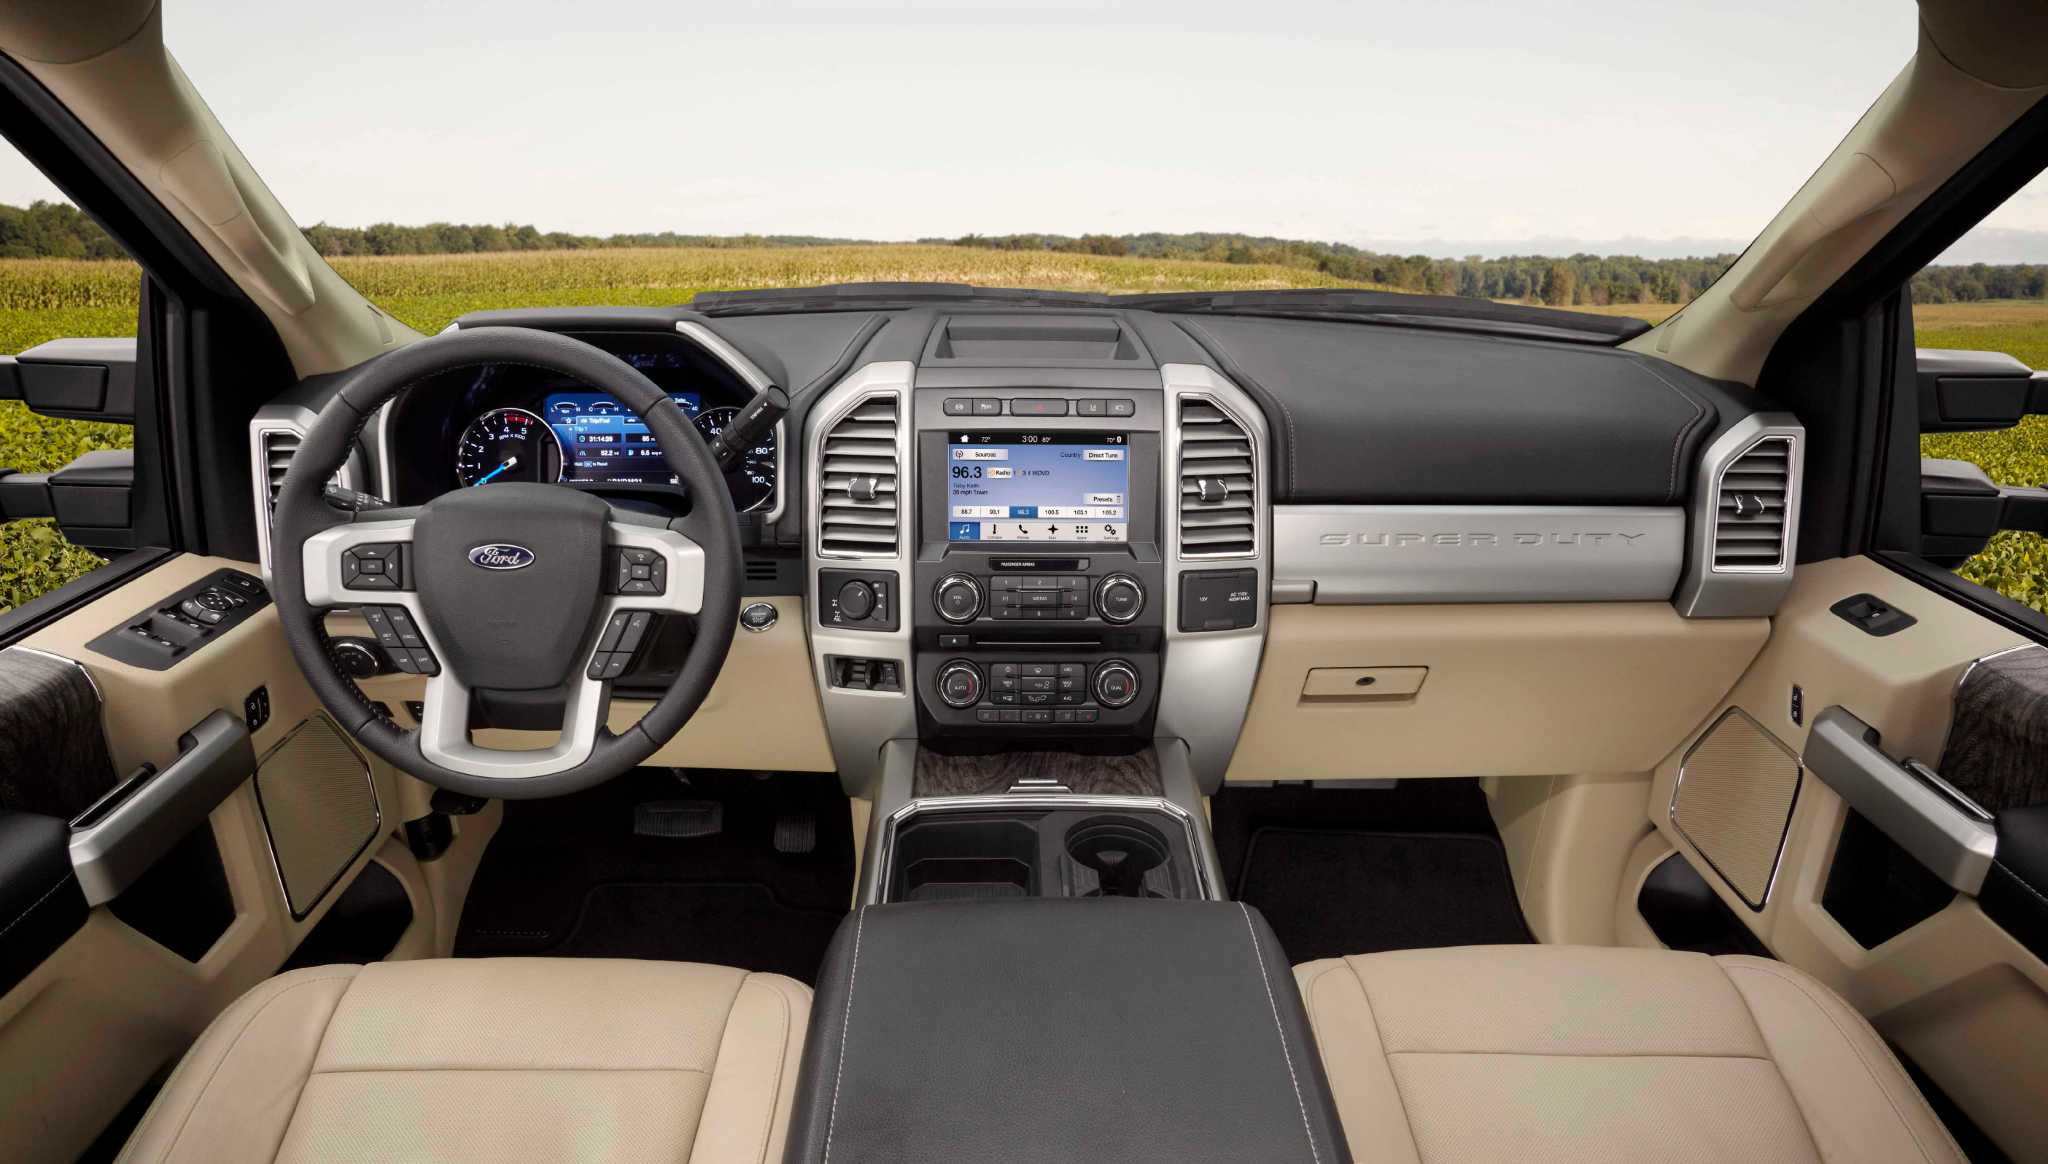 Ford S Newest High Tech Super Duty Can Be Downright Decadent